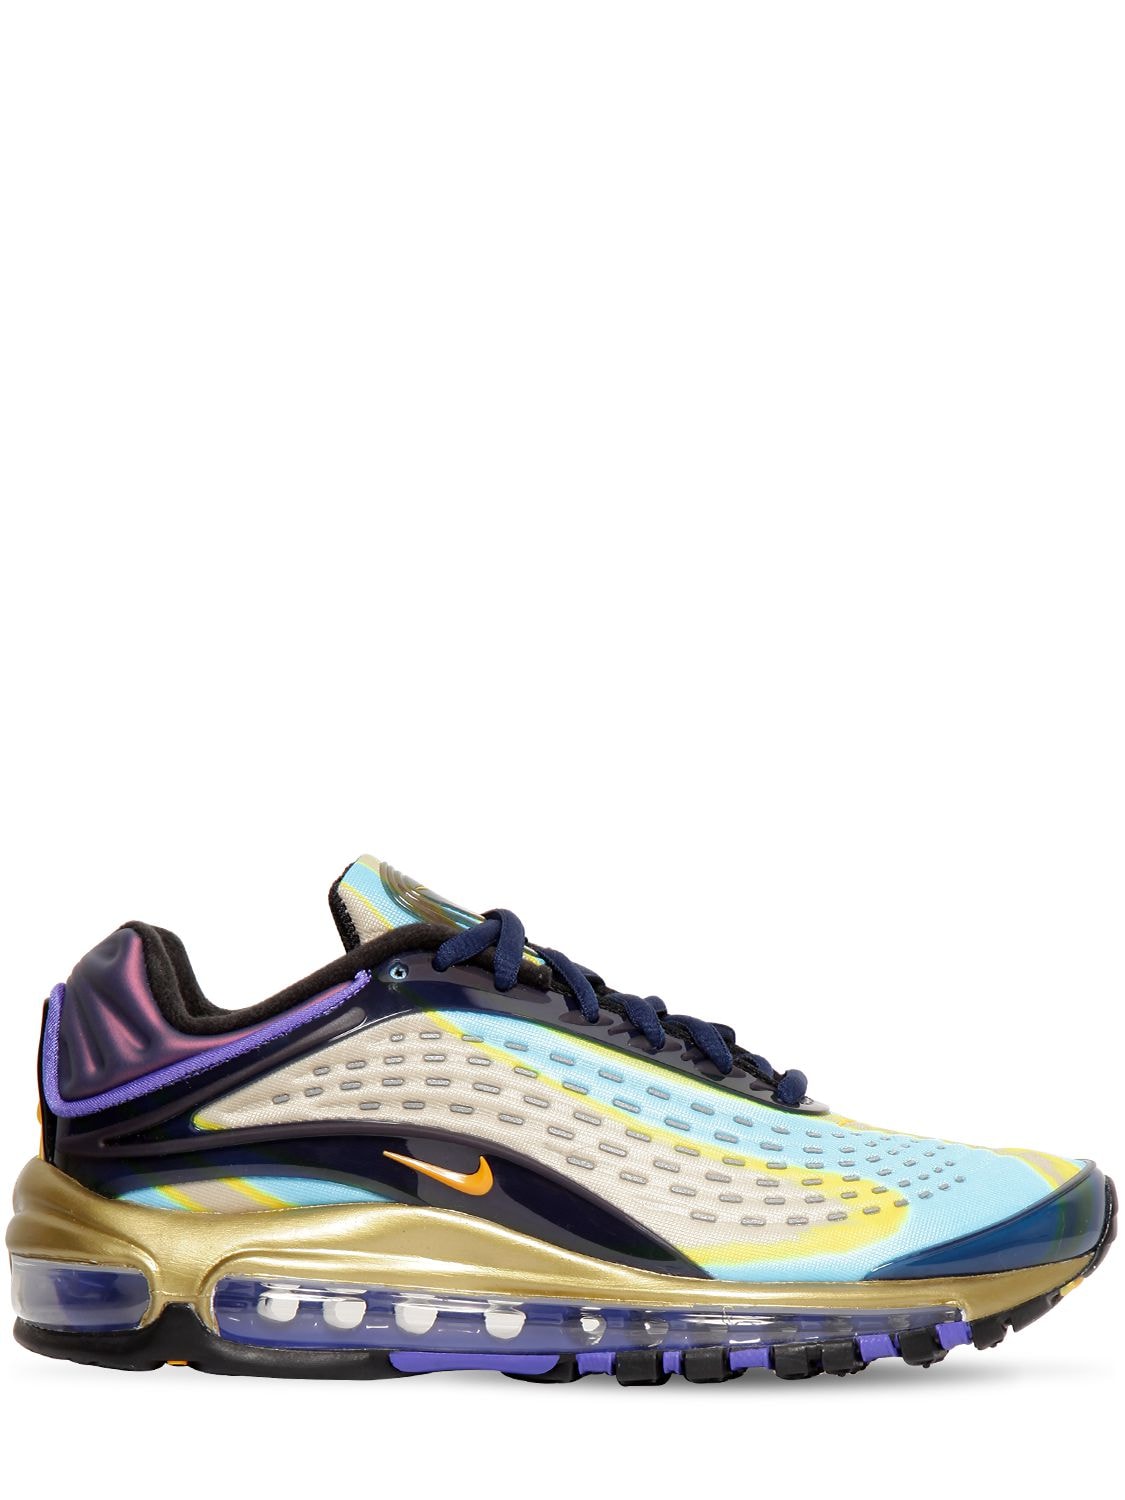 Buy Air Max Deluxe 1999 Og Sneakers for 